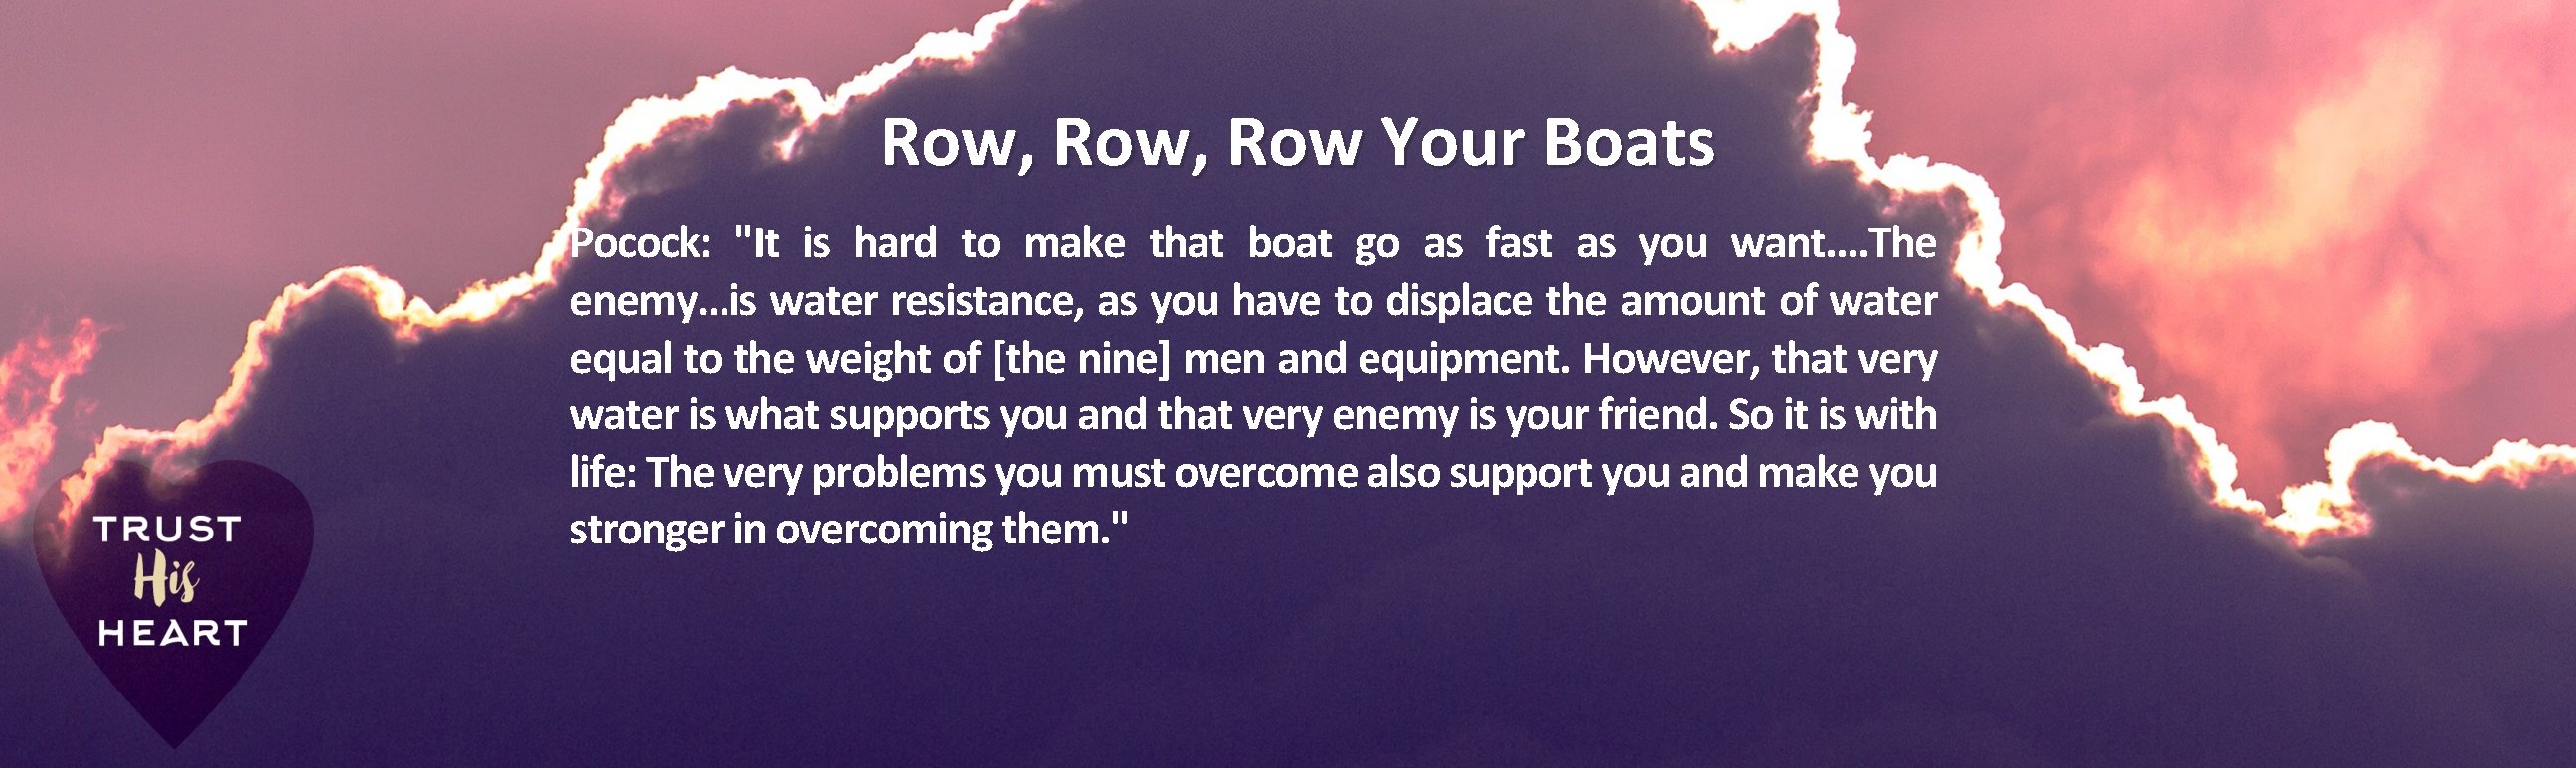 Row, Row Your Boats Pocock: "It is hard to make that boat go as